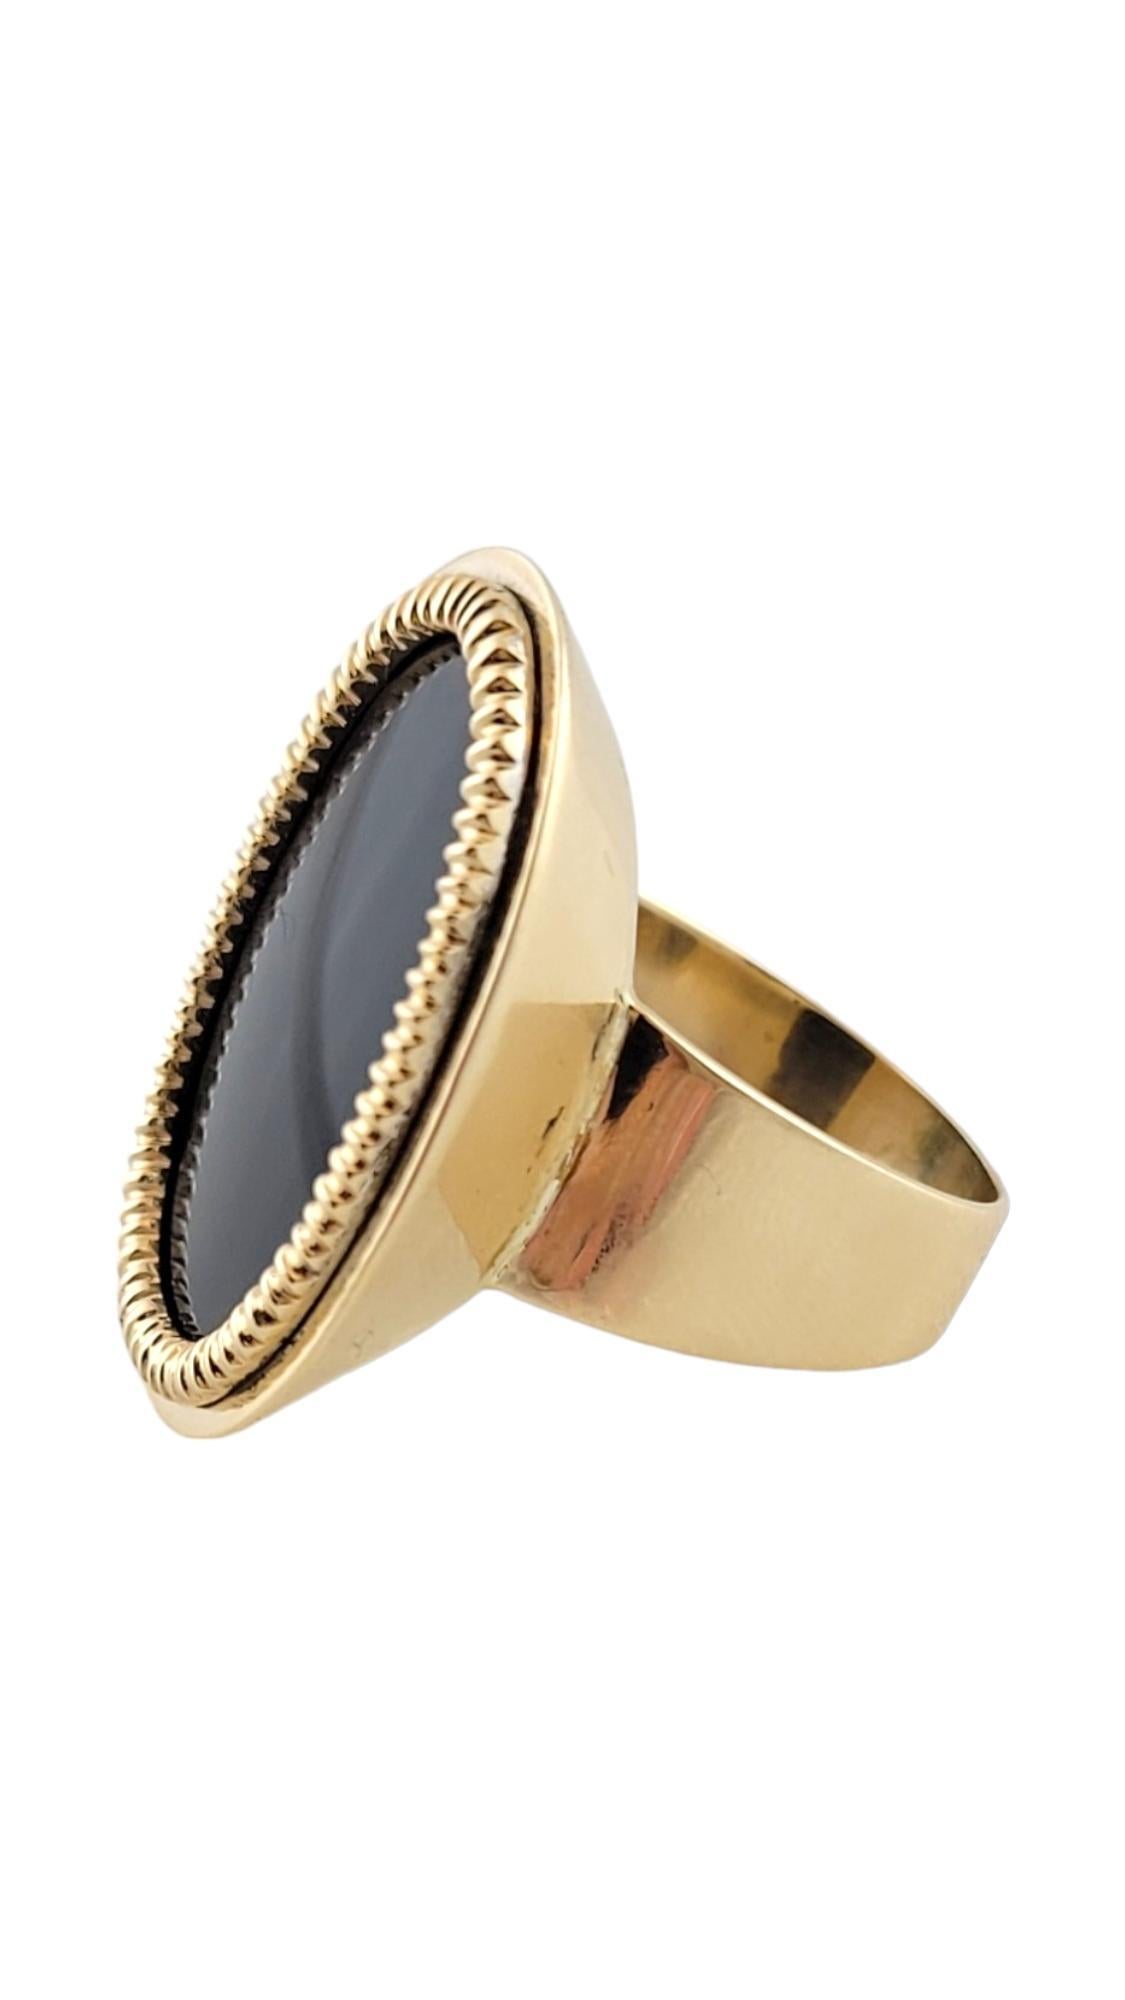 Vintage 14K Yellow Gold Oval Onyx Ring Size 7.75

This gorgeous ring features a large, flat, oval onyx stone set in 14K yellow gold!

Ring size: 7.75
Shank: 4.7mm
Front: 29.21mm X 22.31mm X 5.3mm

Weight: 11.6 g/ 7.4 dwt

Hallmark: 14K

Very good